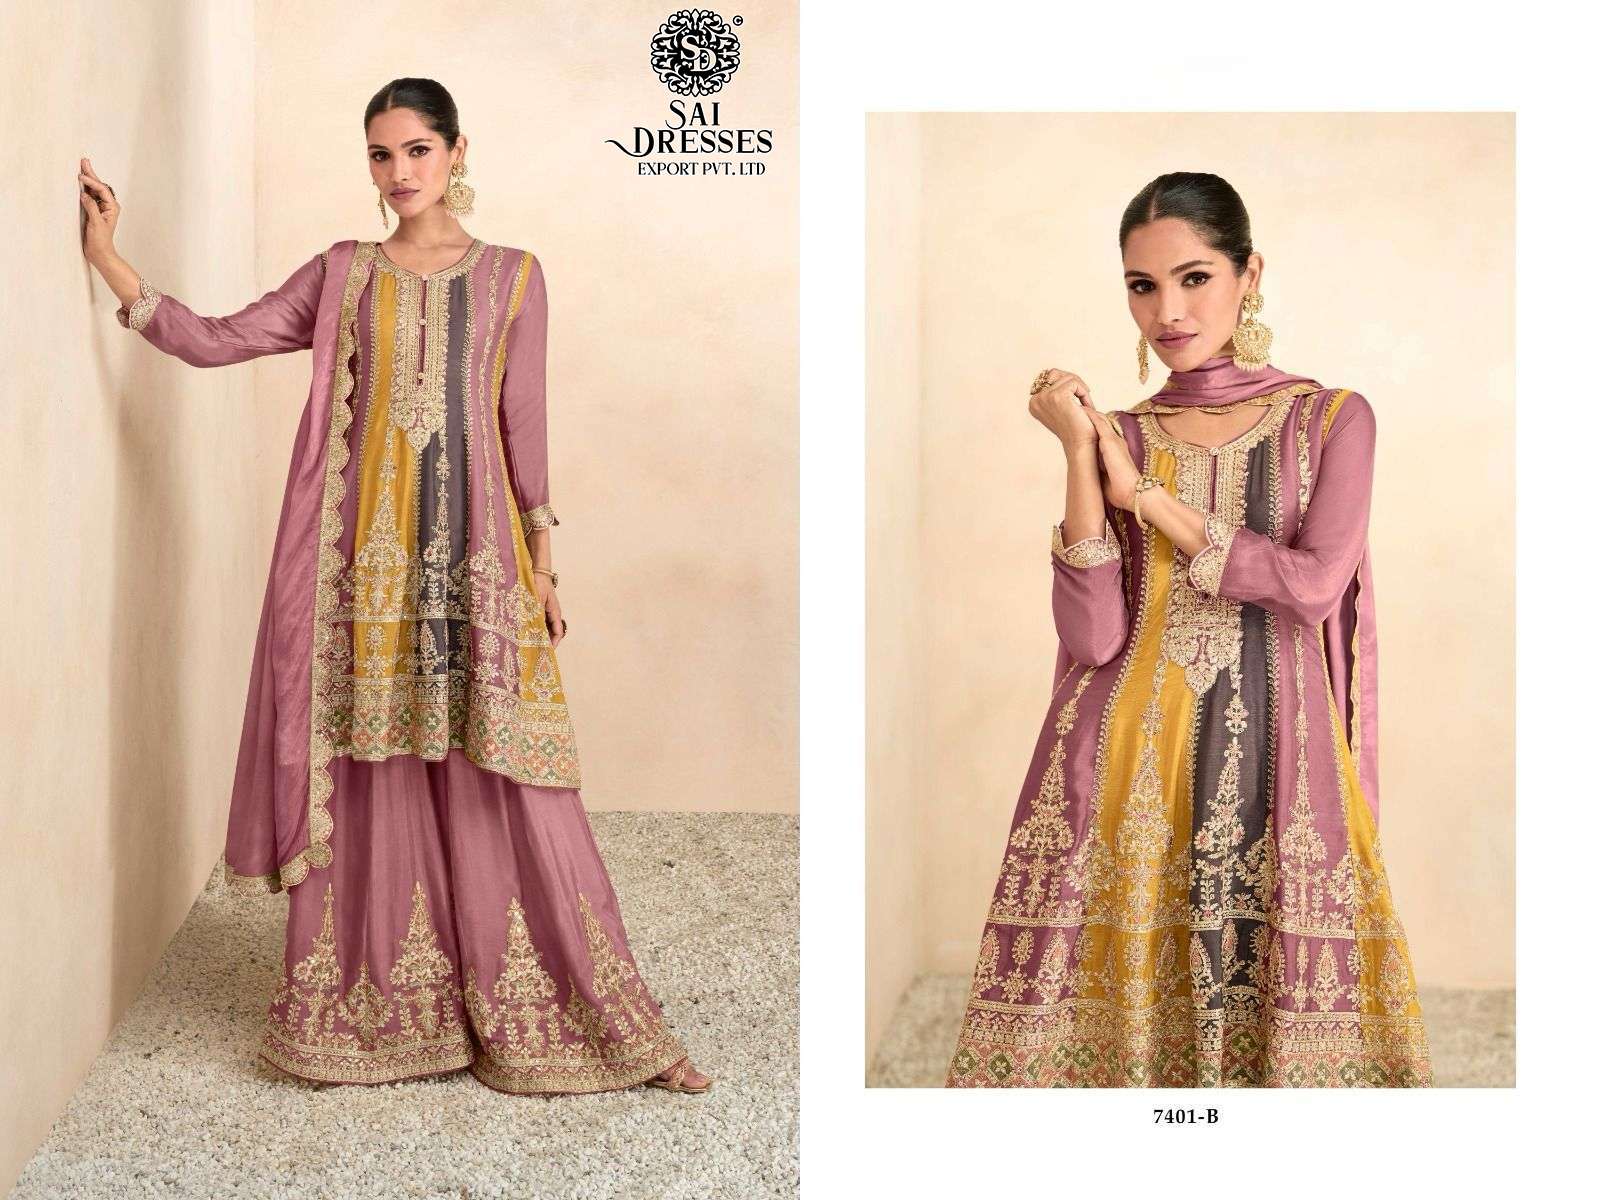 SAI DRESSES PRESENT PREET READYMADE EXCLUSIVE FESTIVE WEAR PEPLUM WITH PLAZZO STYLE DESIGNER SUITS IN WHOLESALE RATE IN SURAT